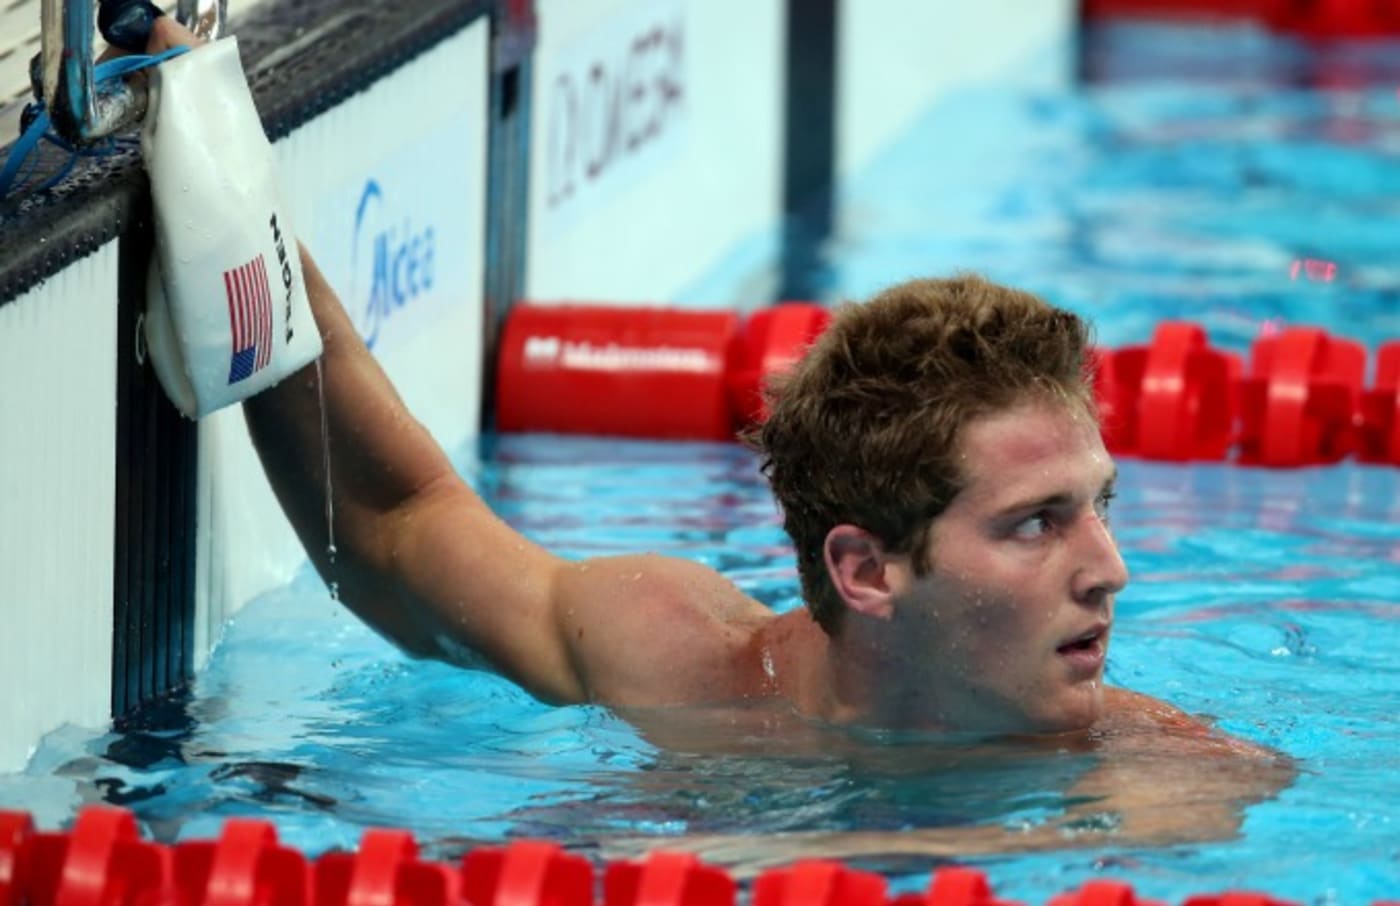 Jimmy Feigen agrees to make $11,000 donation to charity to avoid prosecution in Rio.